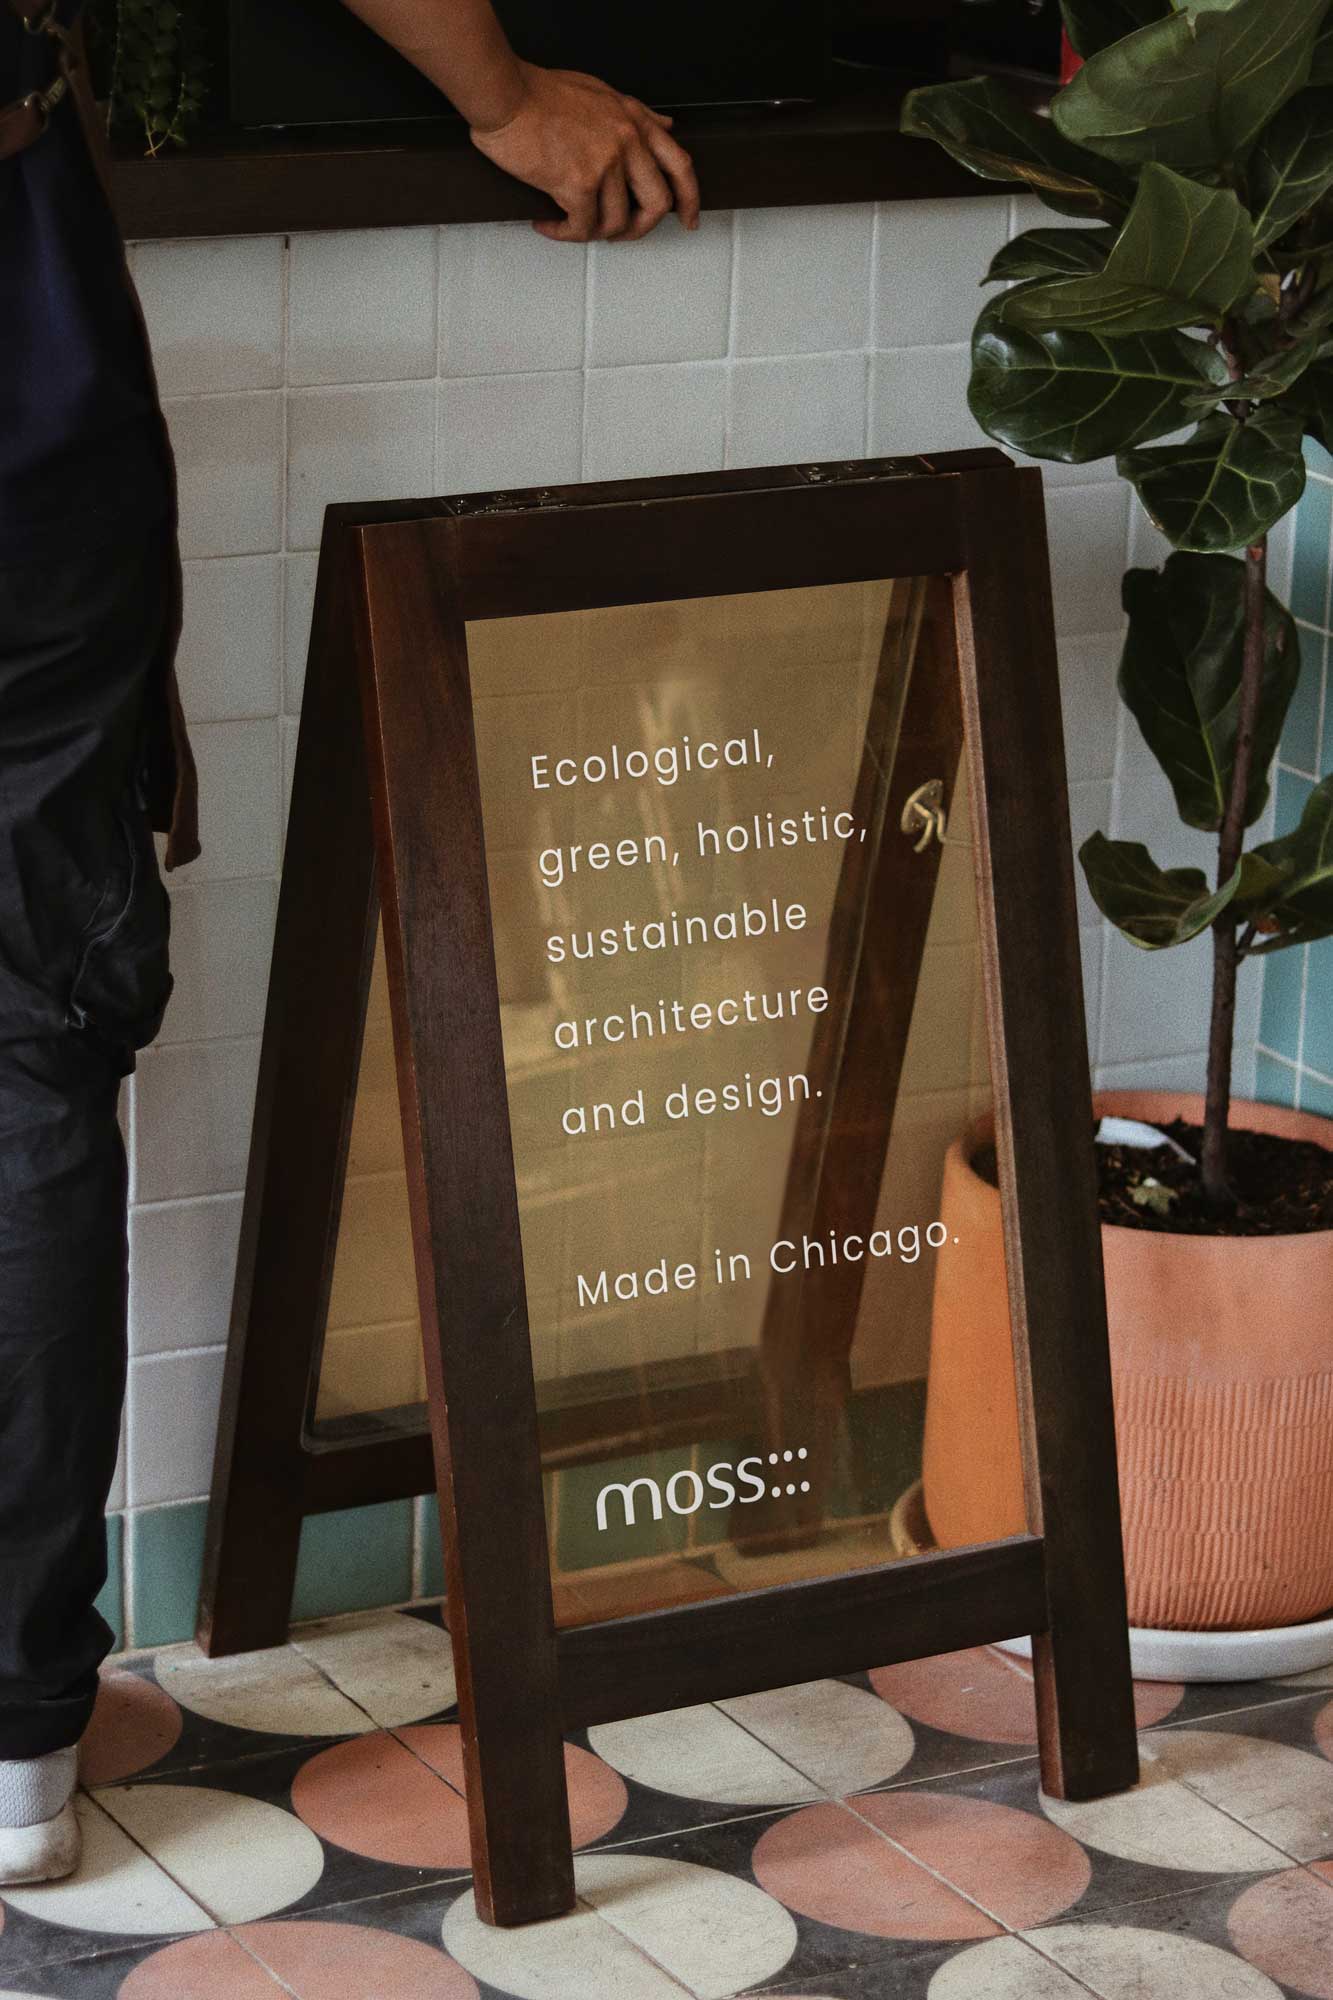 A glass stand sign advertising an architecture company.